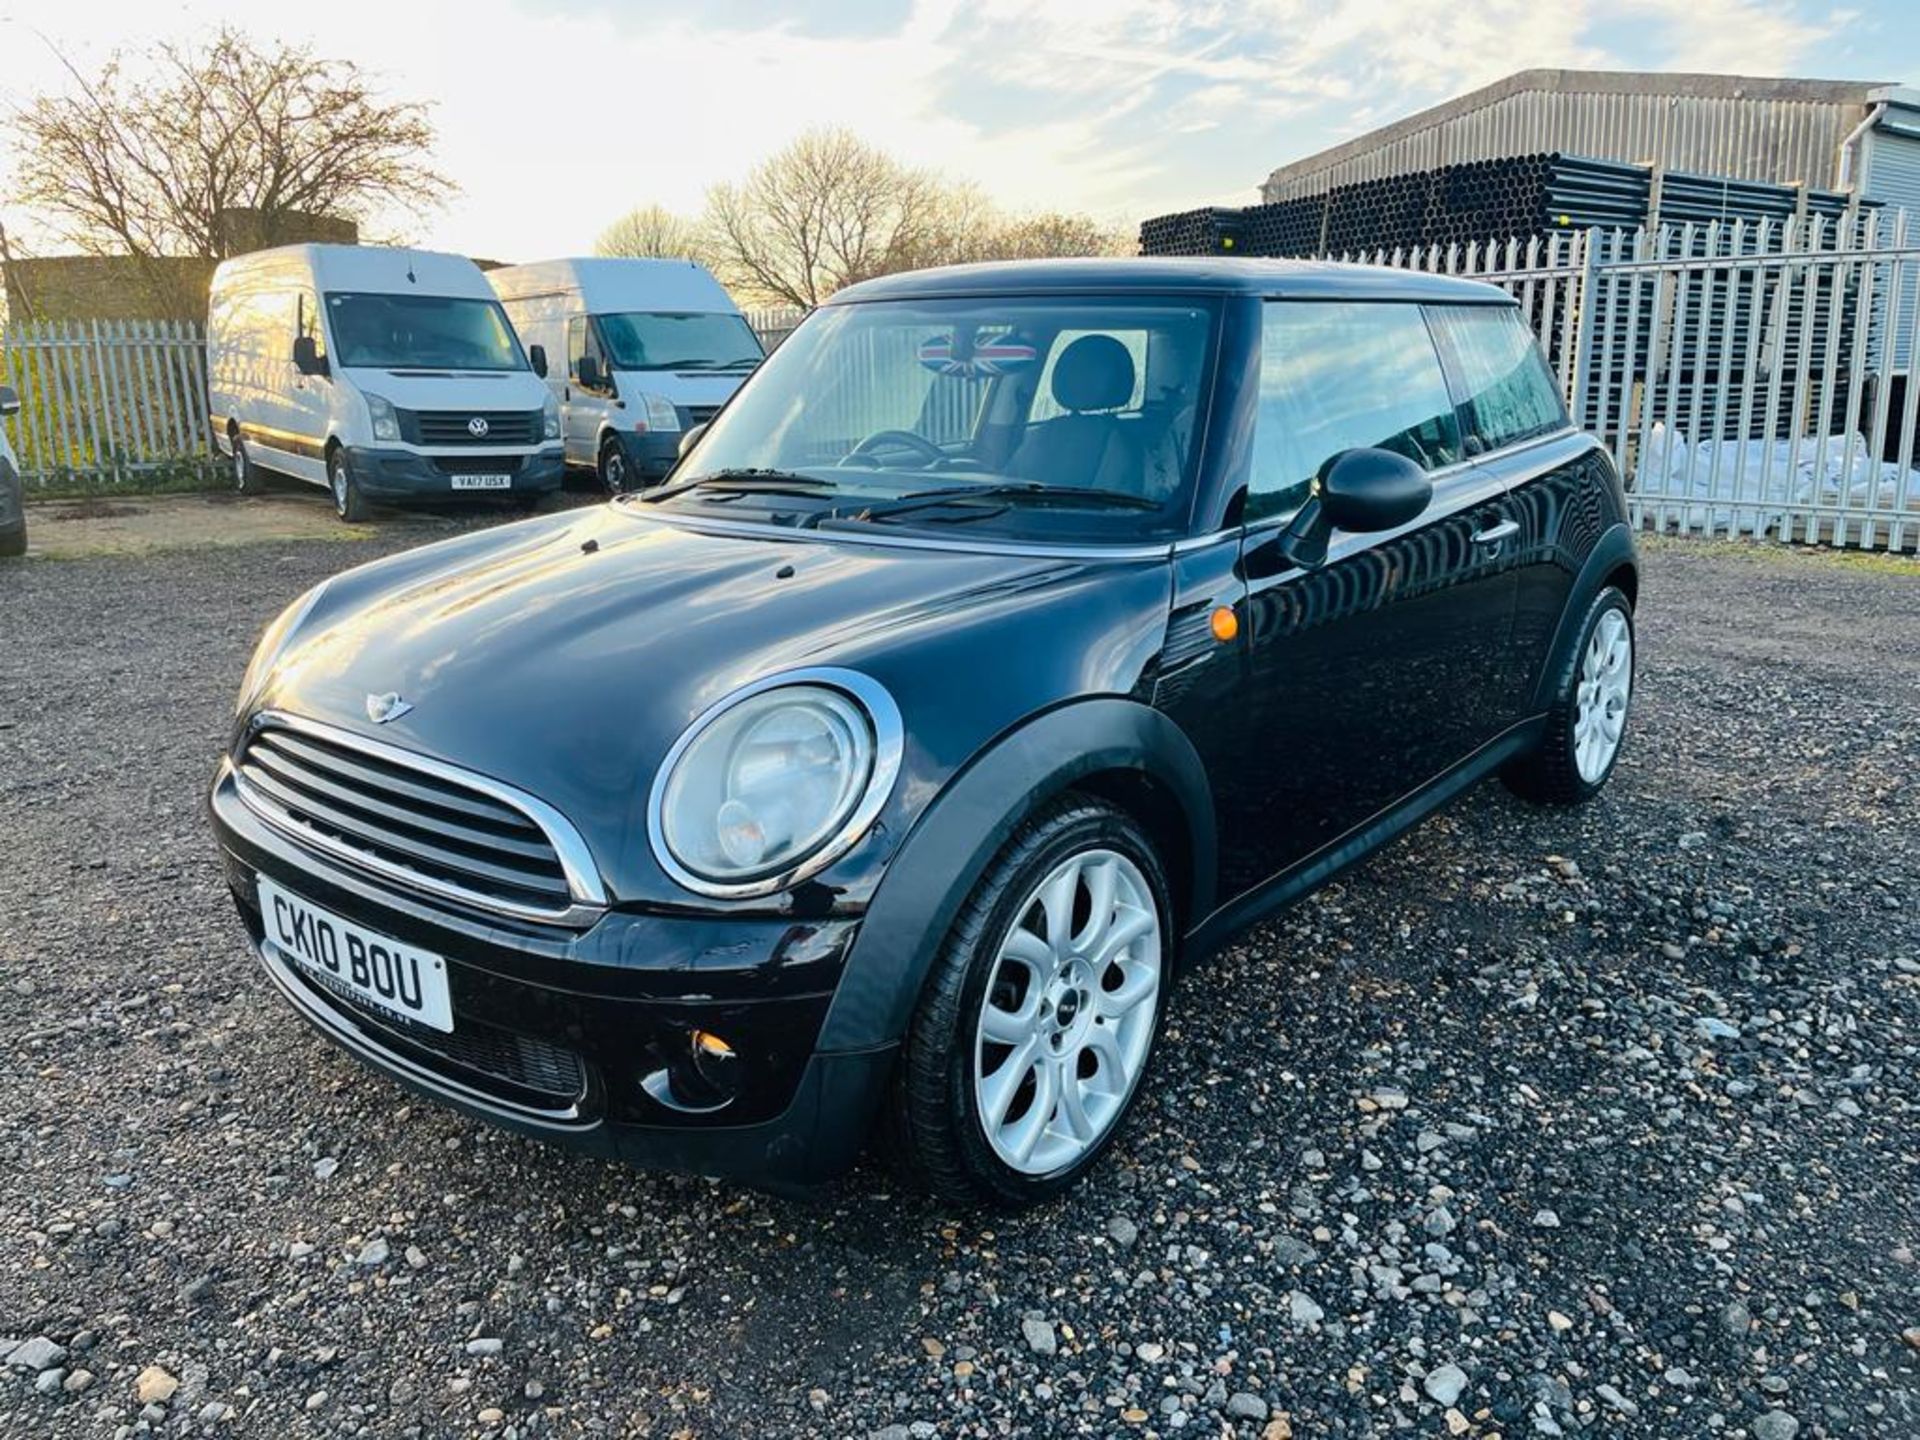 ** ON SALE ** Mini One 1.6 Start/Stop 100 2010 '10 Reg' ' Very Economical' Only 108,430 - No Vat - Image 3 of 26